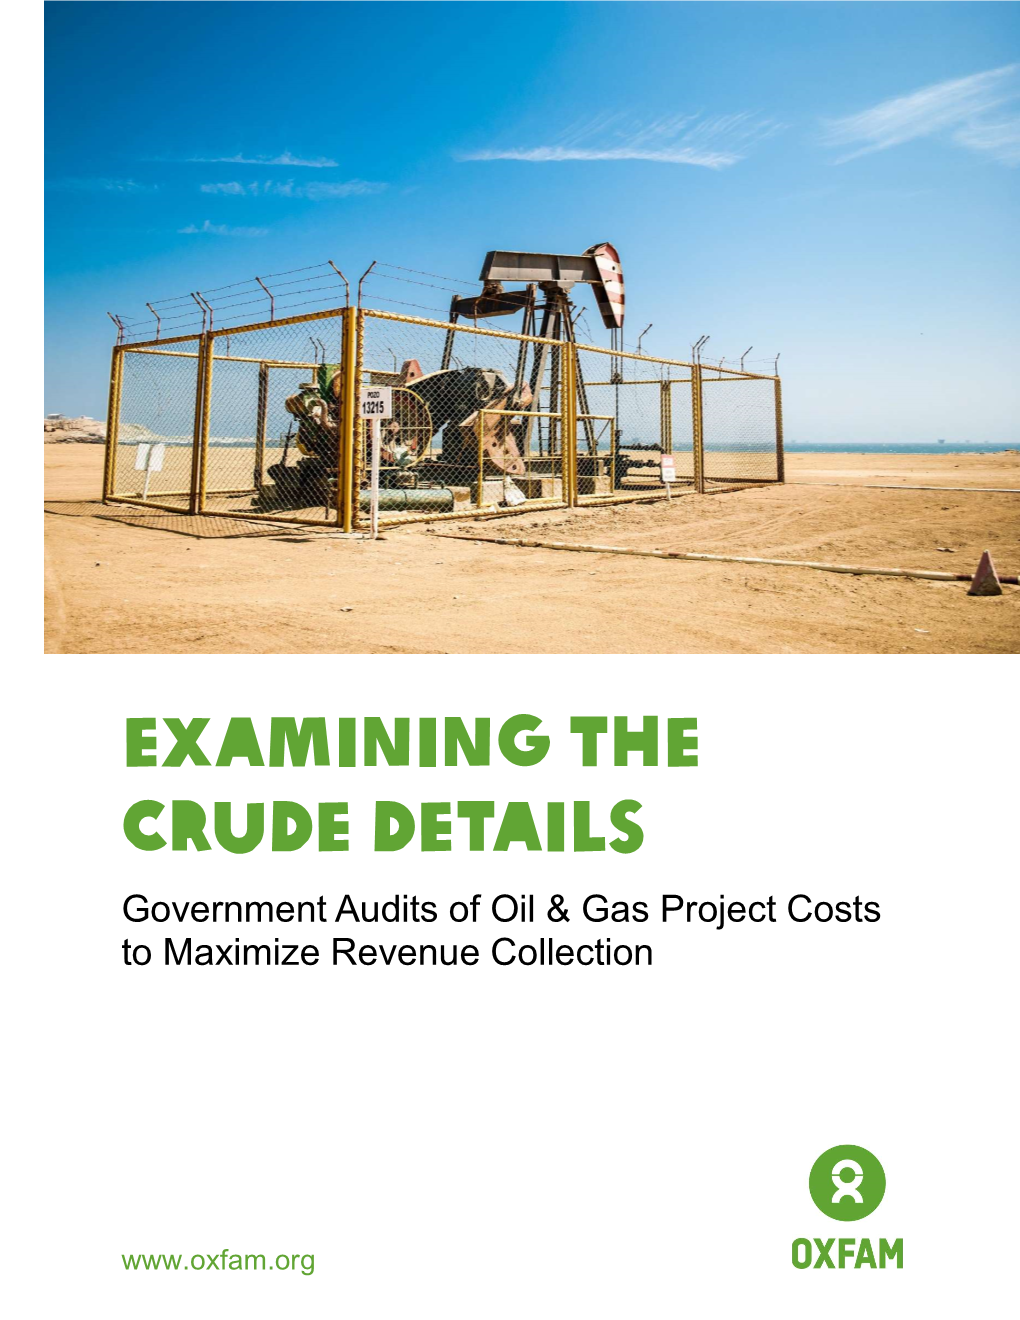 Examining the Crude Details: Government Audits of Oil & Gas Project Costs to Maximize Revenue Collection